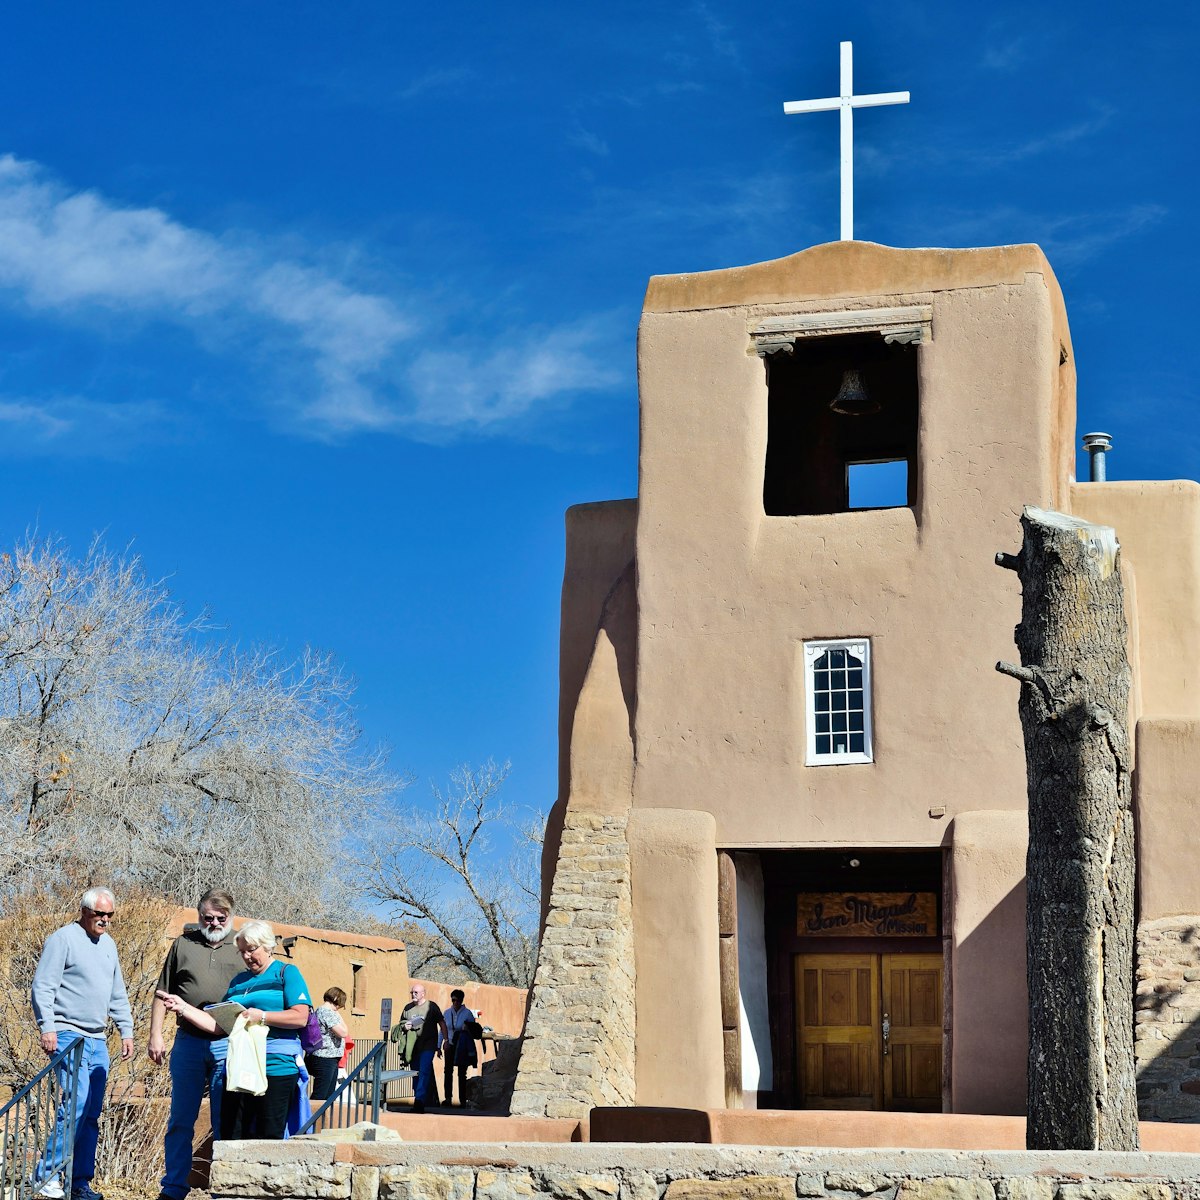 San Miguel Mission

"Santa Fe, New Mexico, USA - March 18, 2013: People walking past the beautiful Mission San Miguel in the historic old town section of Santa Fe."
Mission San Miguel , Santa Fe - stock photo
